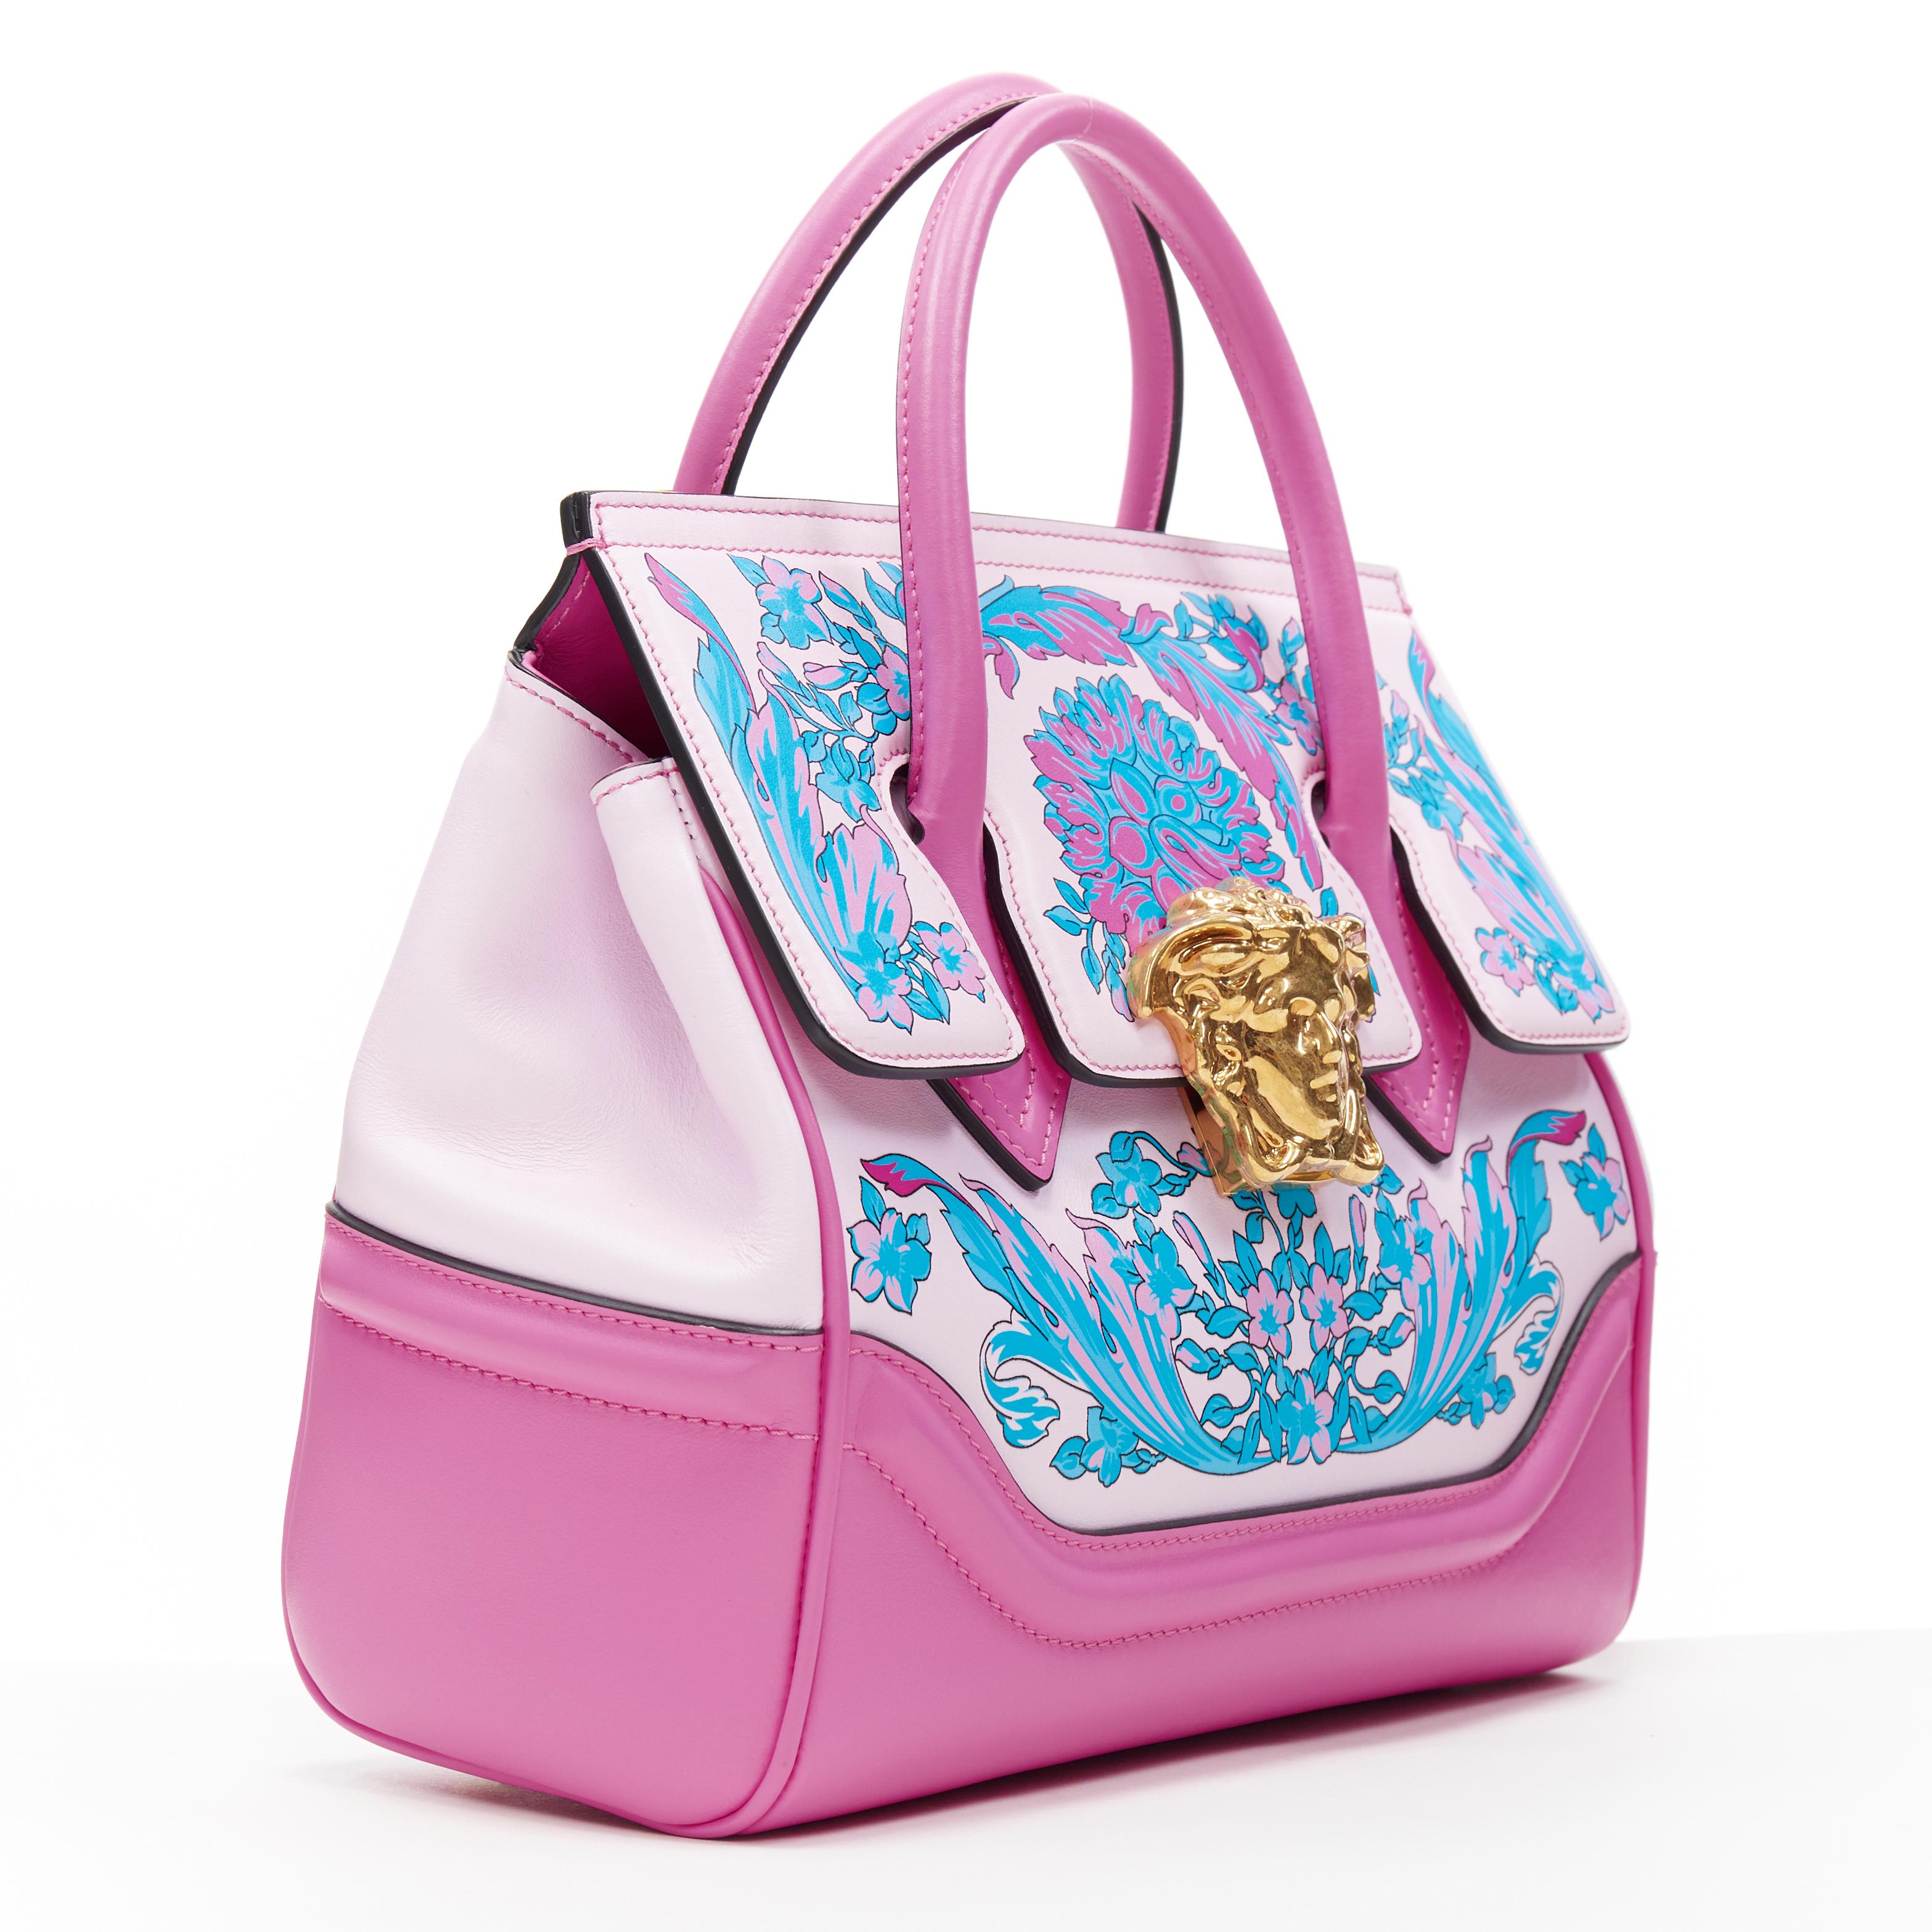 rare VERSACE SS19 Technicolor Baroque Palazzo Empire Small pink Medusa tote bag
Brand: Versace
Designer: Donatella Versace
Collection: Spring Summer 2019
Model Name / Style: Versace Empire
Material: Leather
Color: Pink
Pattern: Floral